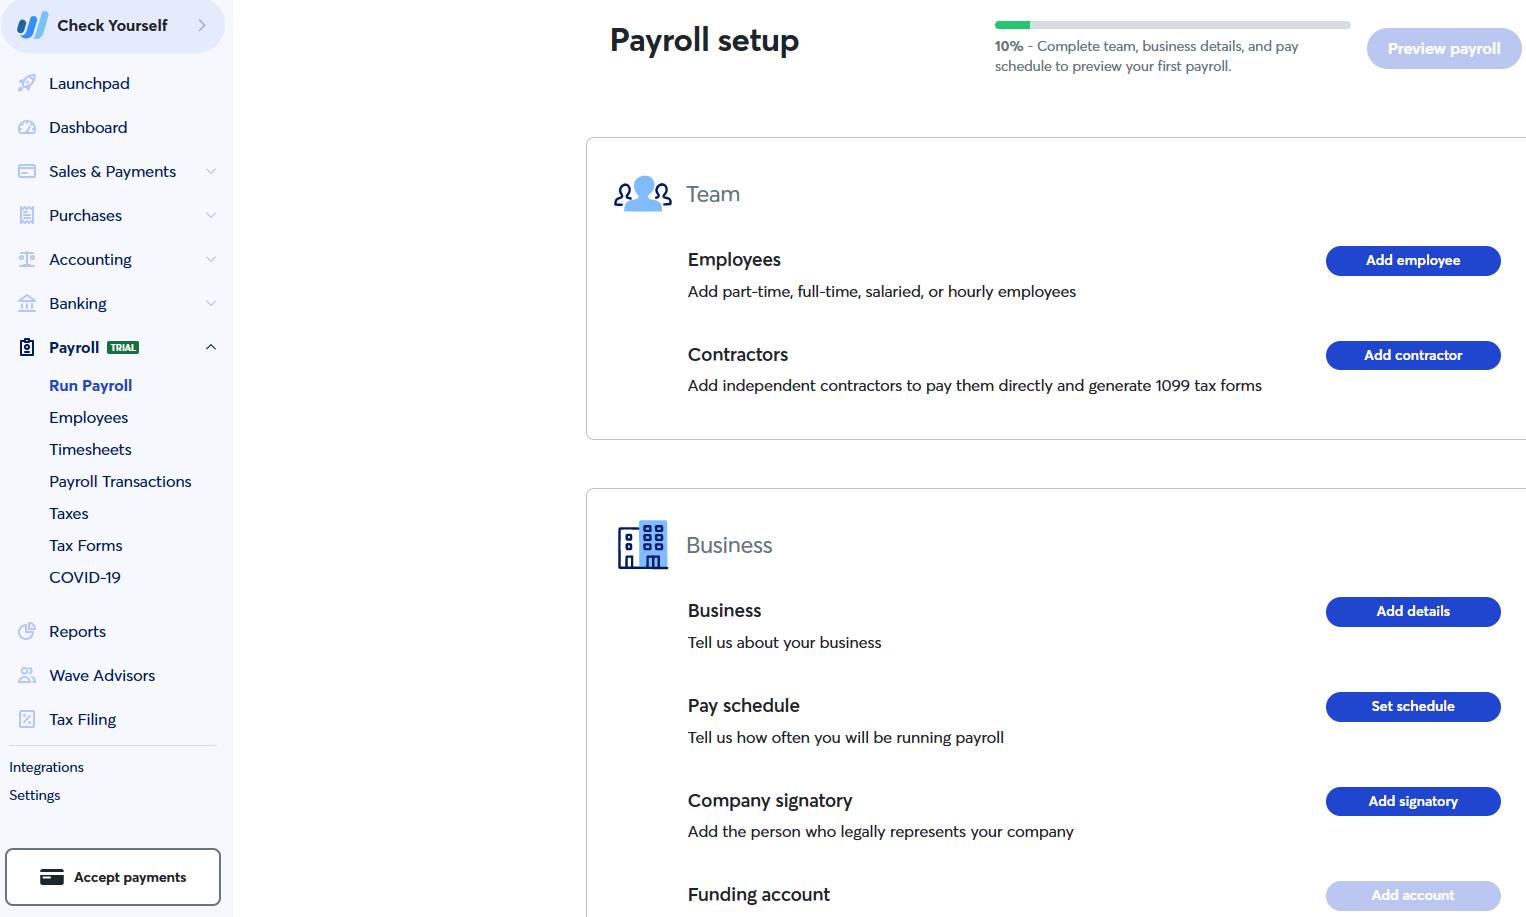 Image of payroll setup screen in Wave Accounting